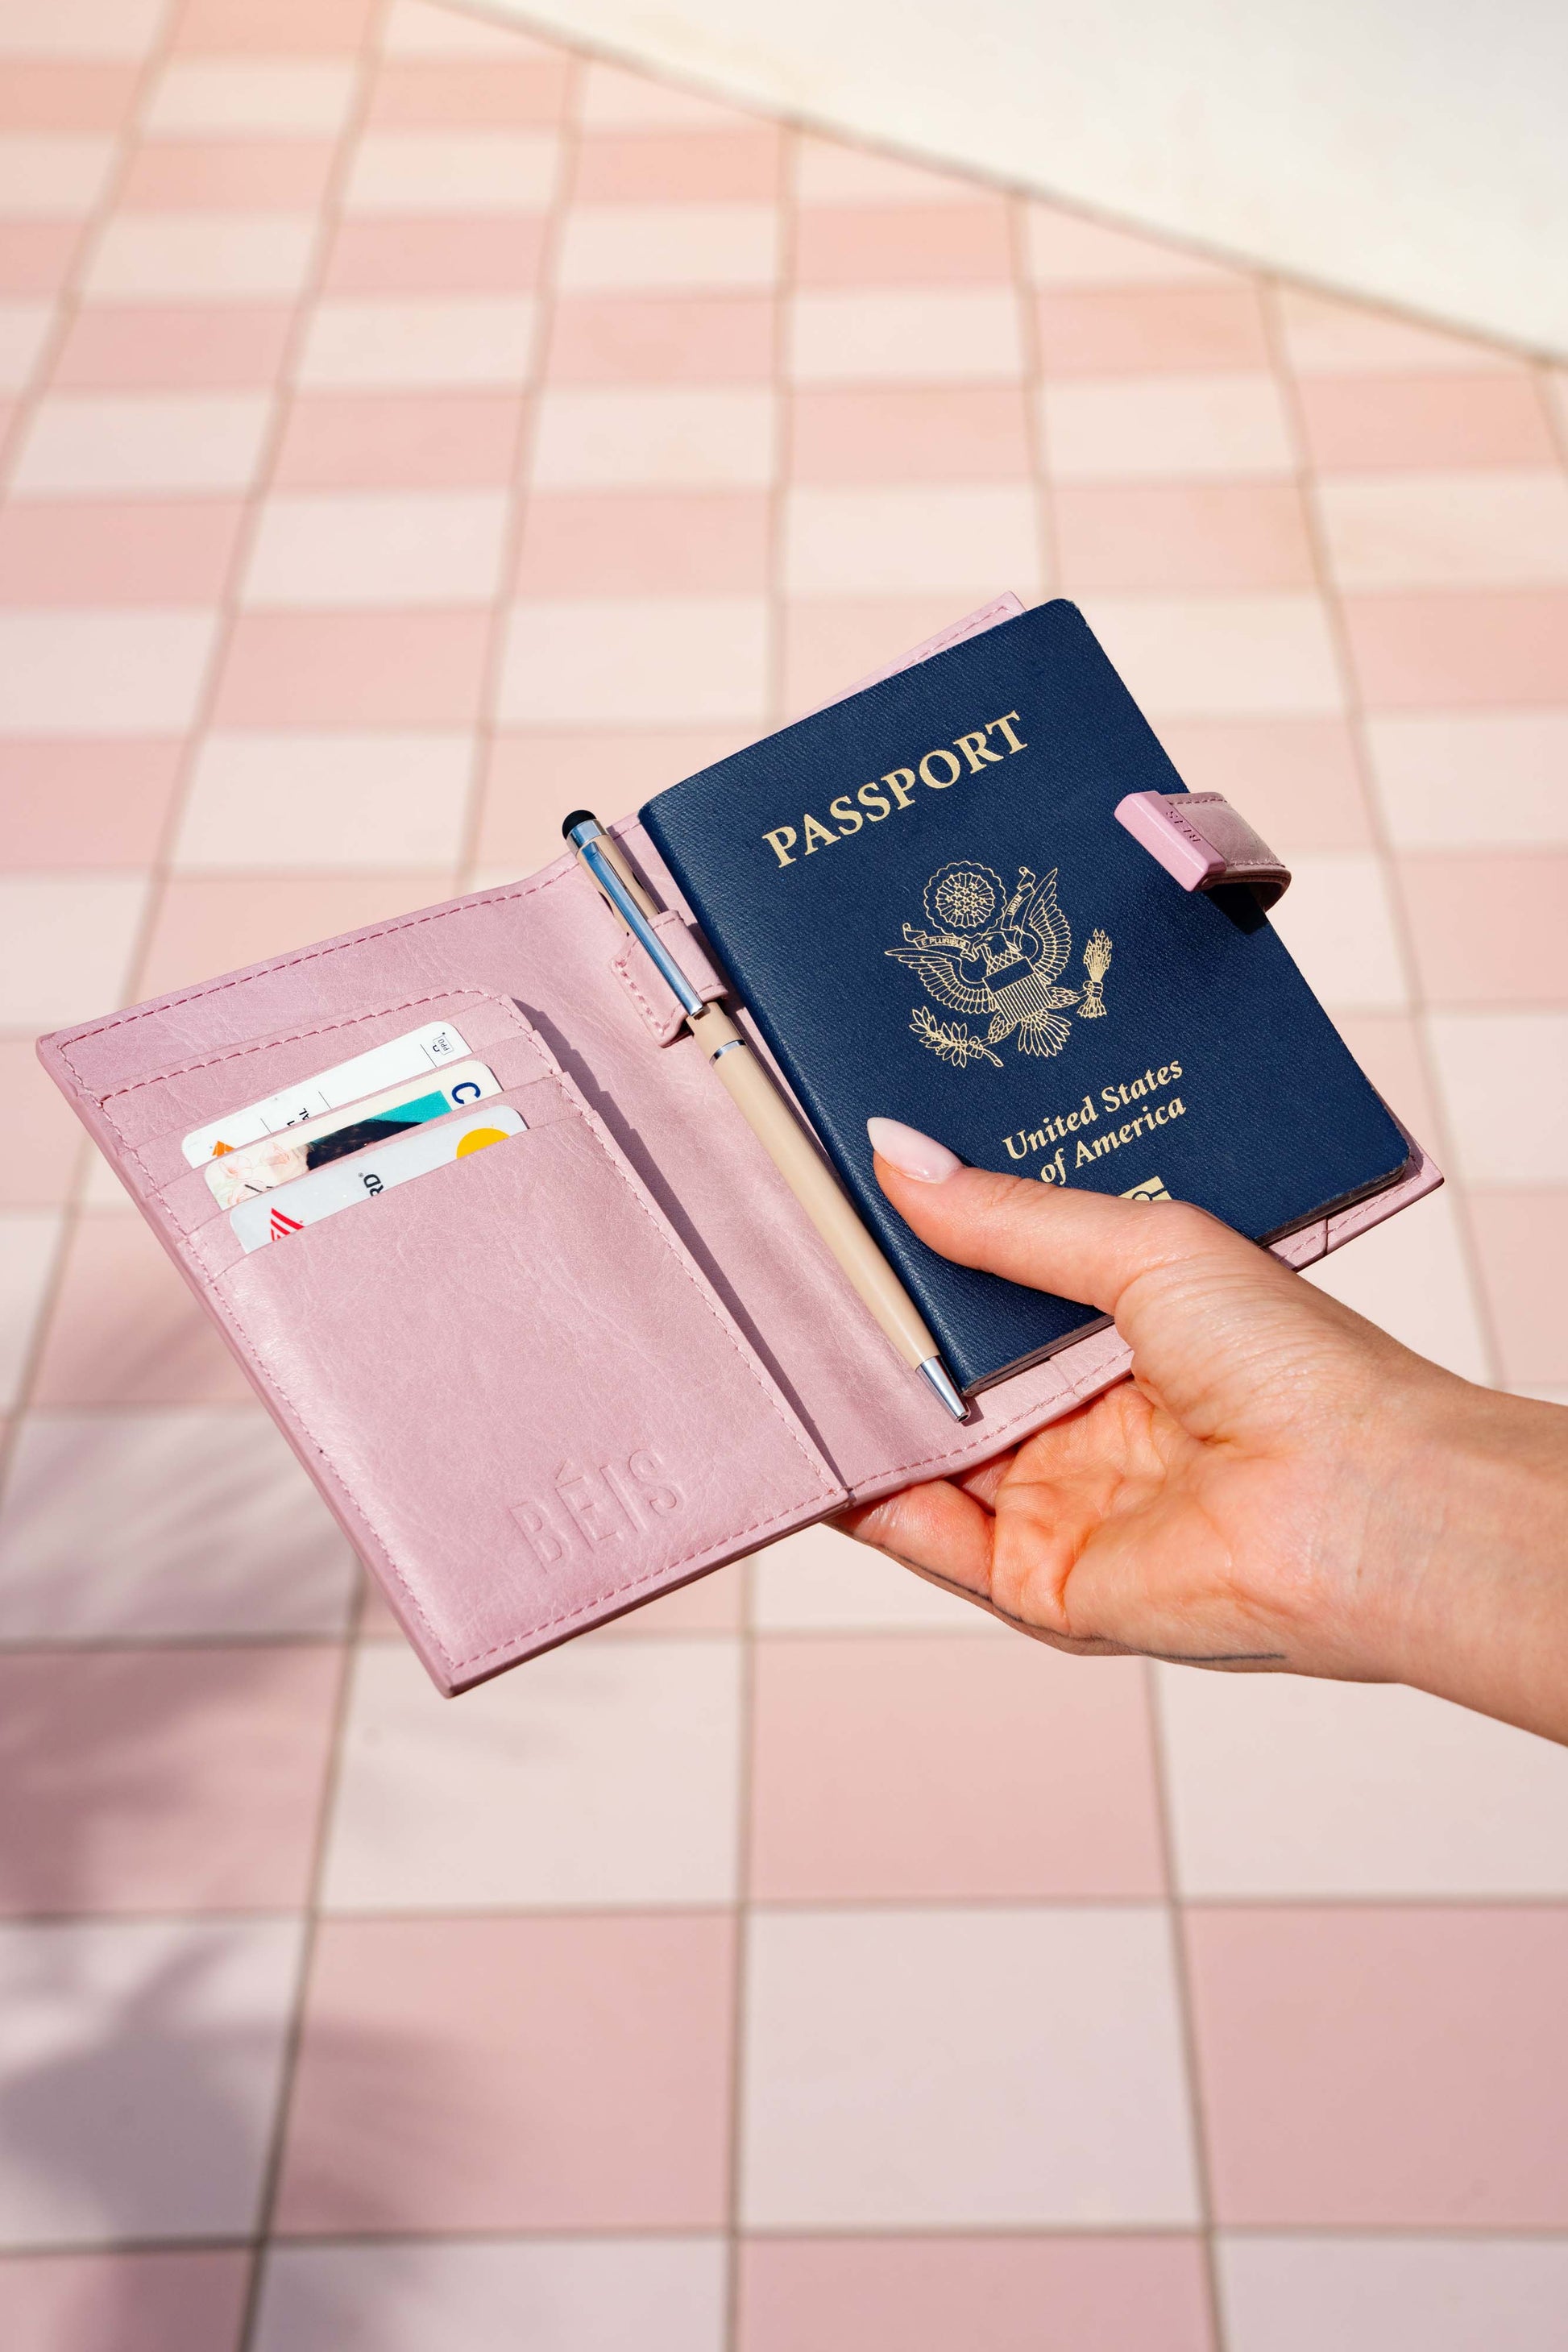 Wallet 2 Pink Real Leather USA Passport Cover Id